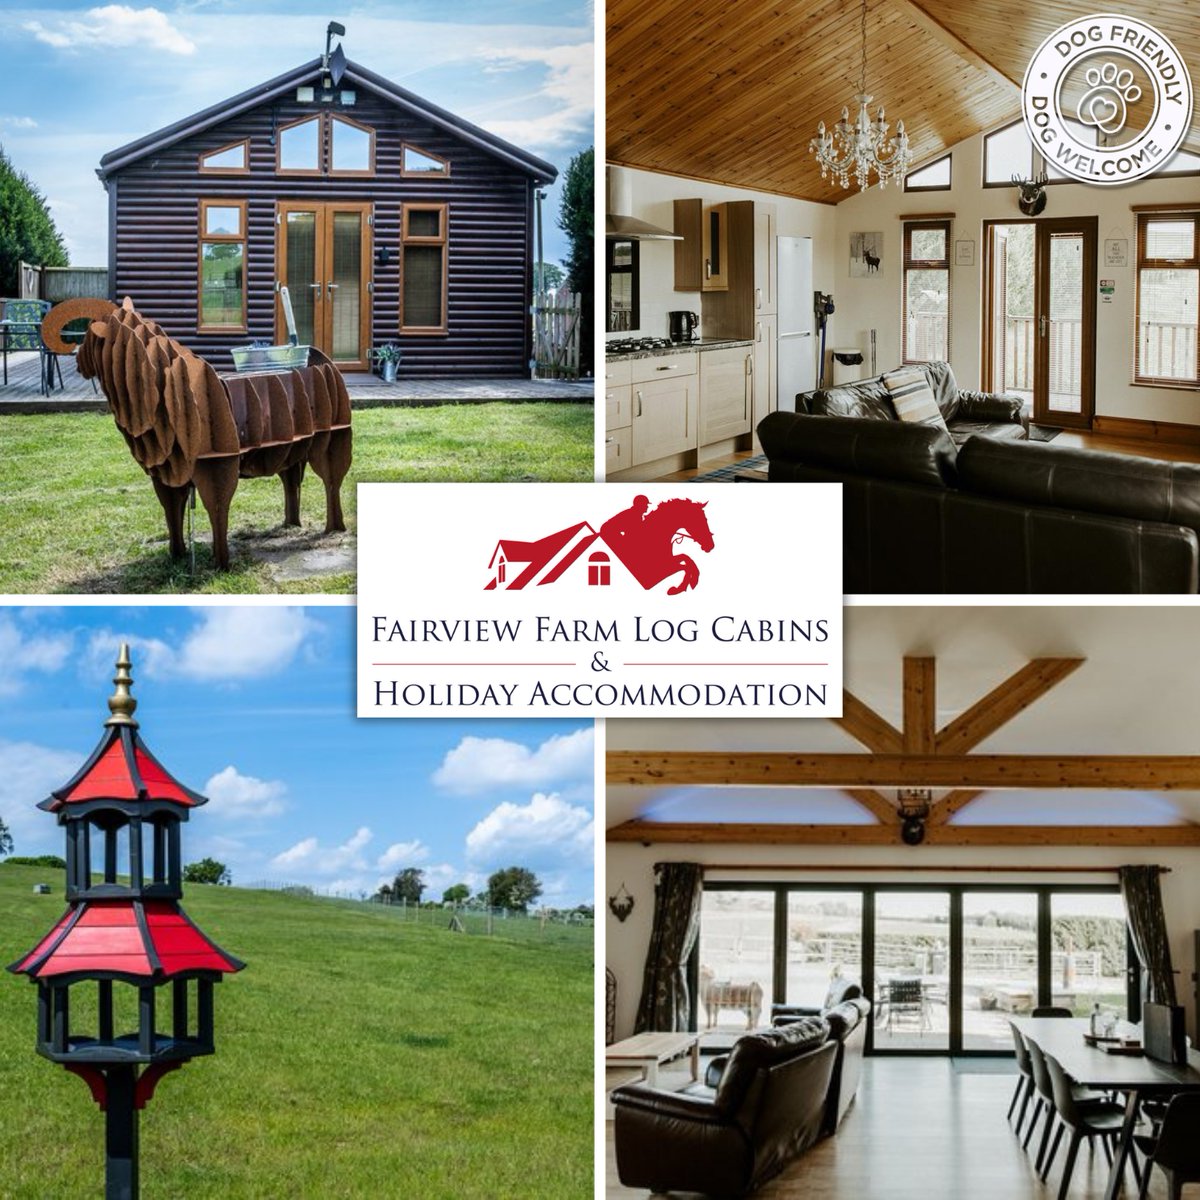 🌳Discover @FairviewNotts! 13 luxury cabins set in 88 acres of stunning #Nottinghamshire countryside. Relax in cosy comfort, meet friendly farm animals, and enjoy picturesque luxury! Info:bit.ly/3W3VRyE Free pamper a pony and pygmy goat walking session with every stay!